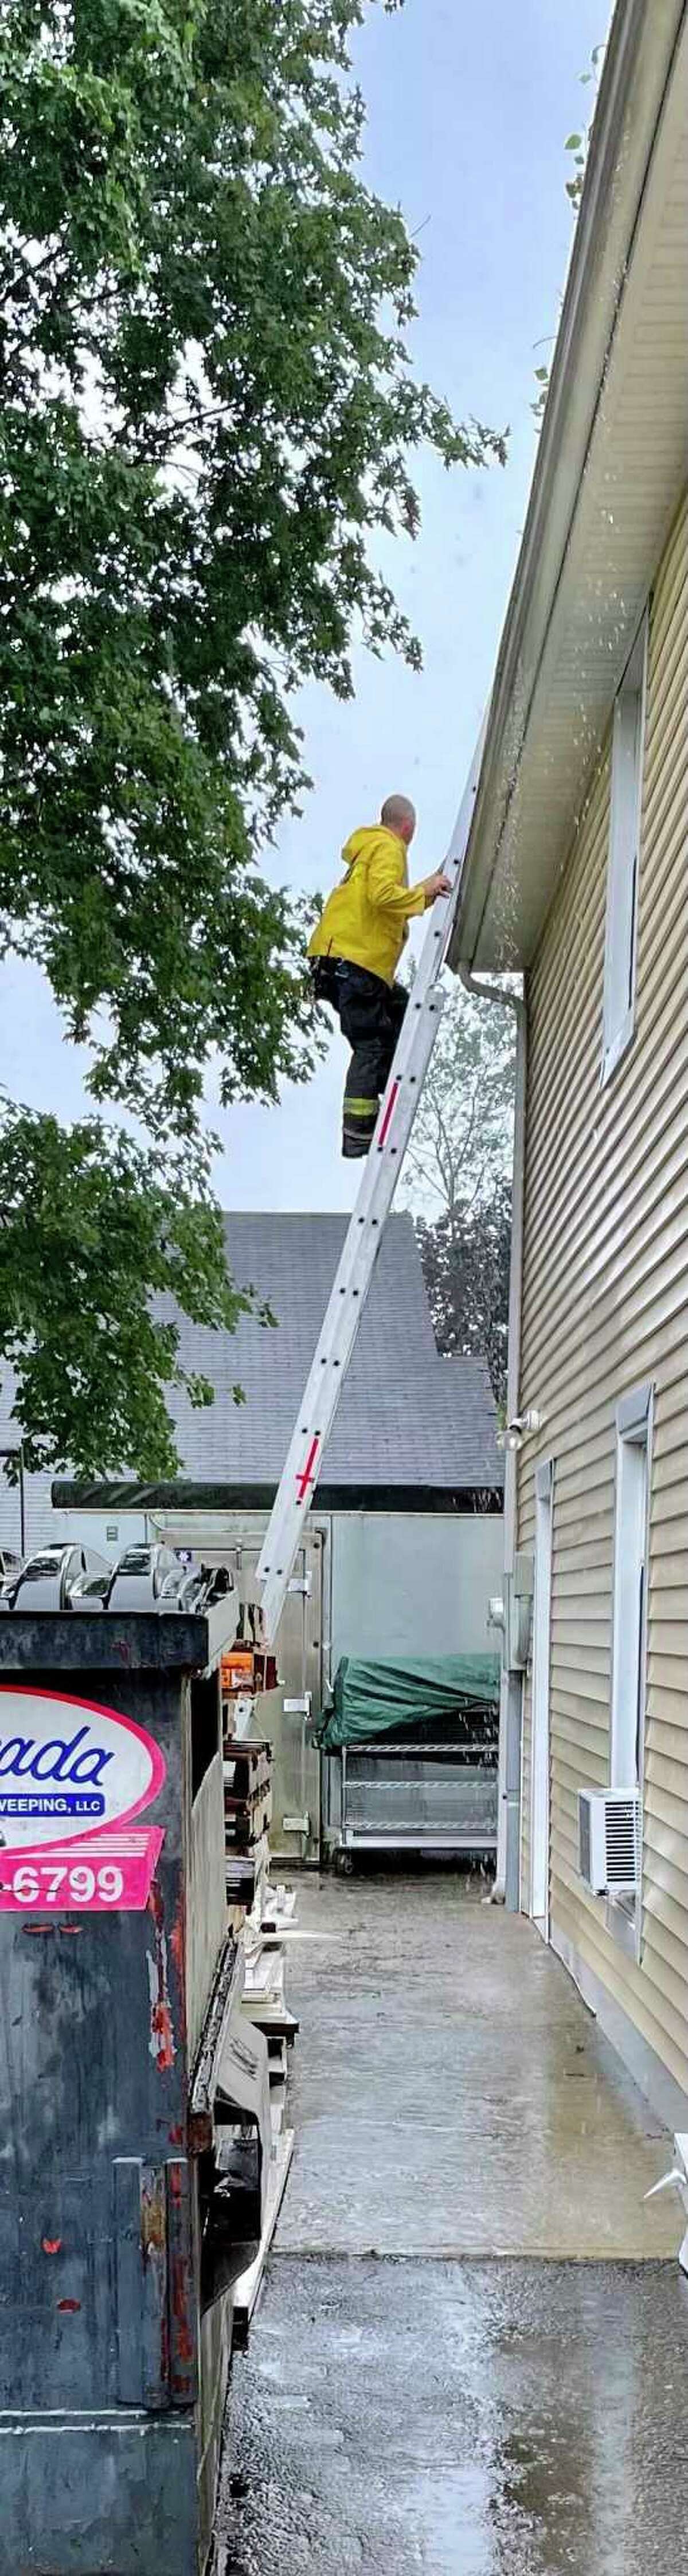 A member of the Torrington Fire Department climbs a ladder to clear a clogged gutter at Friendly Hands Food Bank Monday. Staff members discovered that the clogged gutter had caused flooding inside the building on King Street.